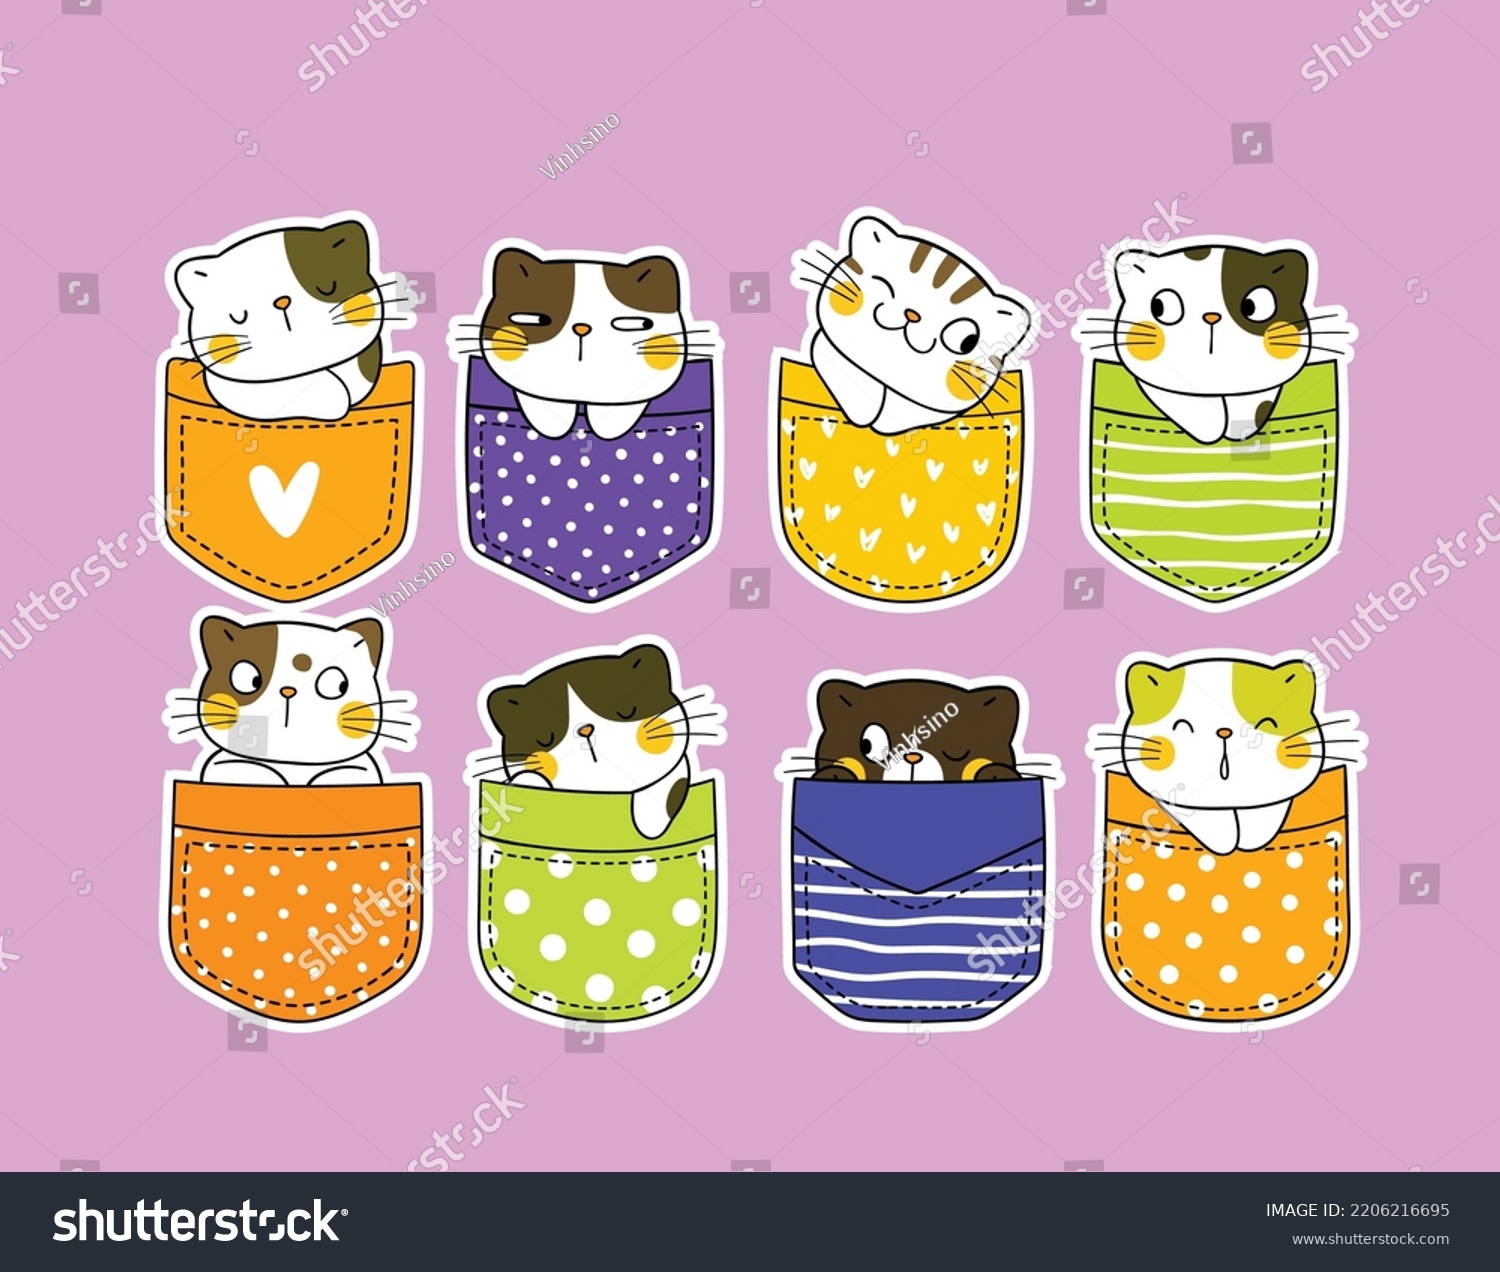 SVG of you can use Doodle pocket cats. Kitten in pockets, happy cartoon cute cat to design banners, posters, backgrounds, print POD...etc. svg